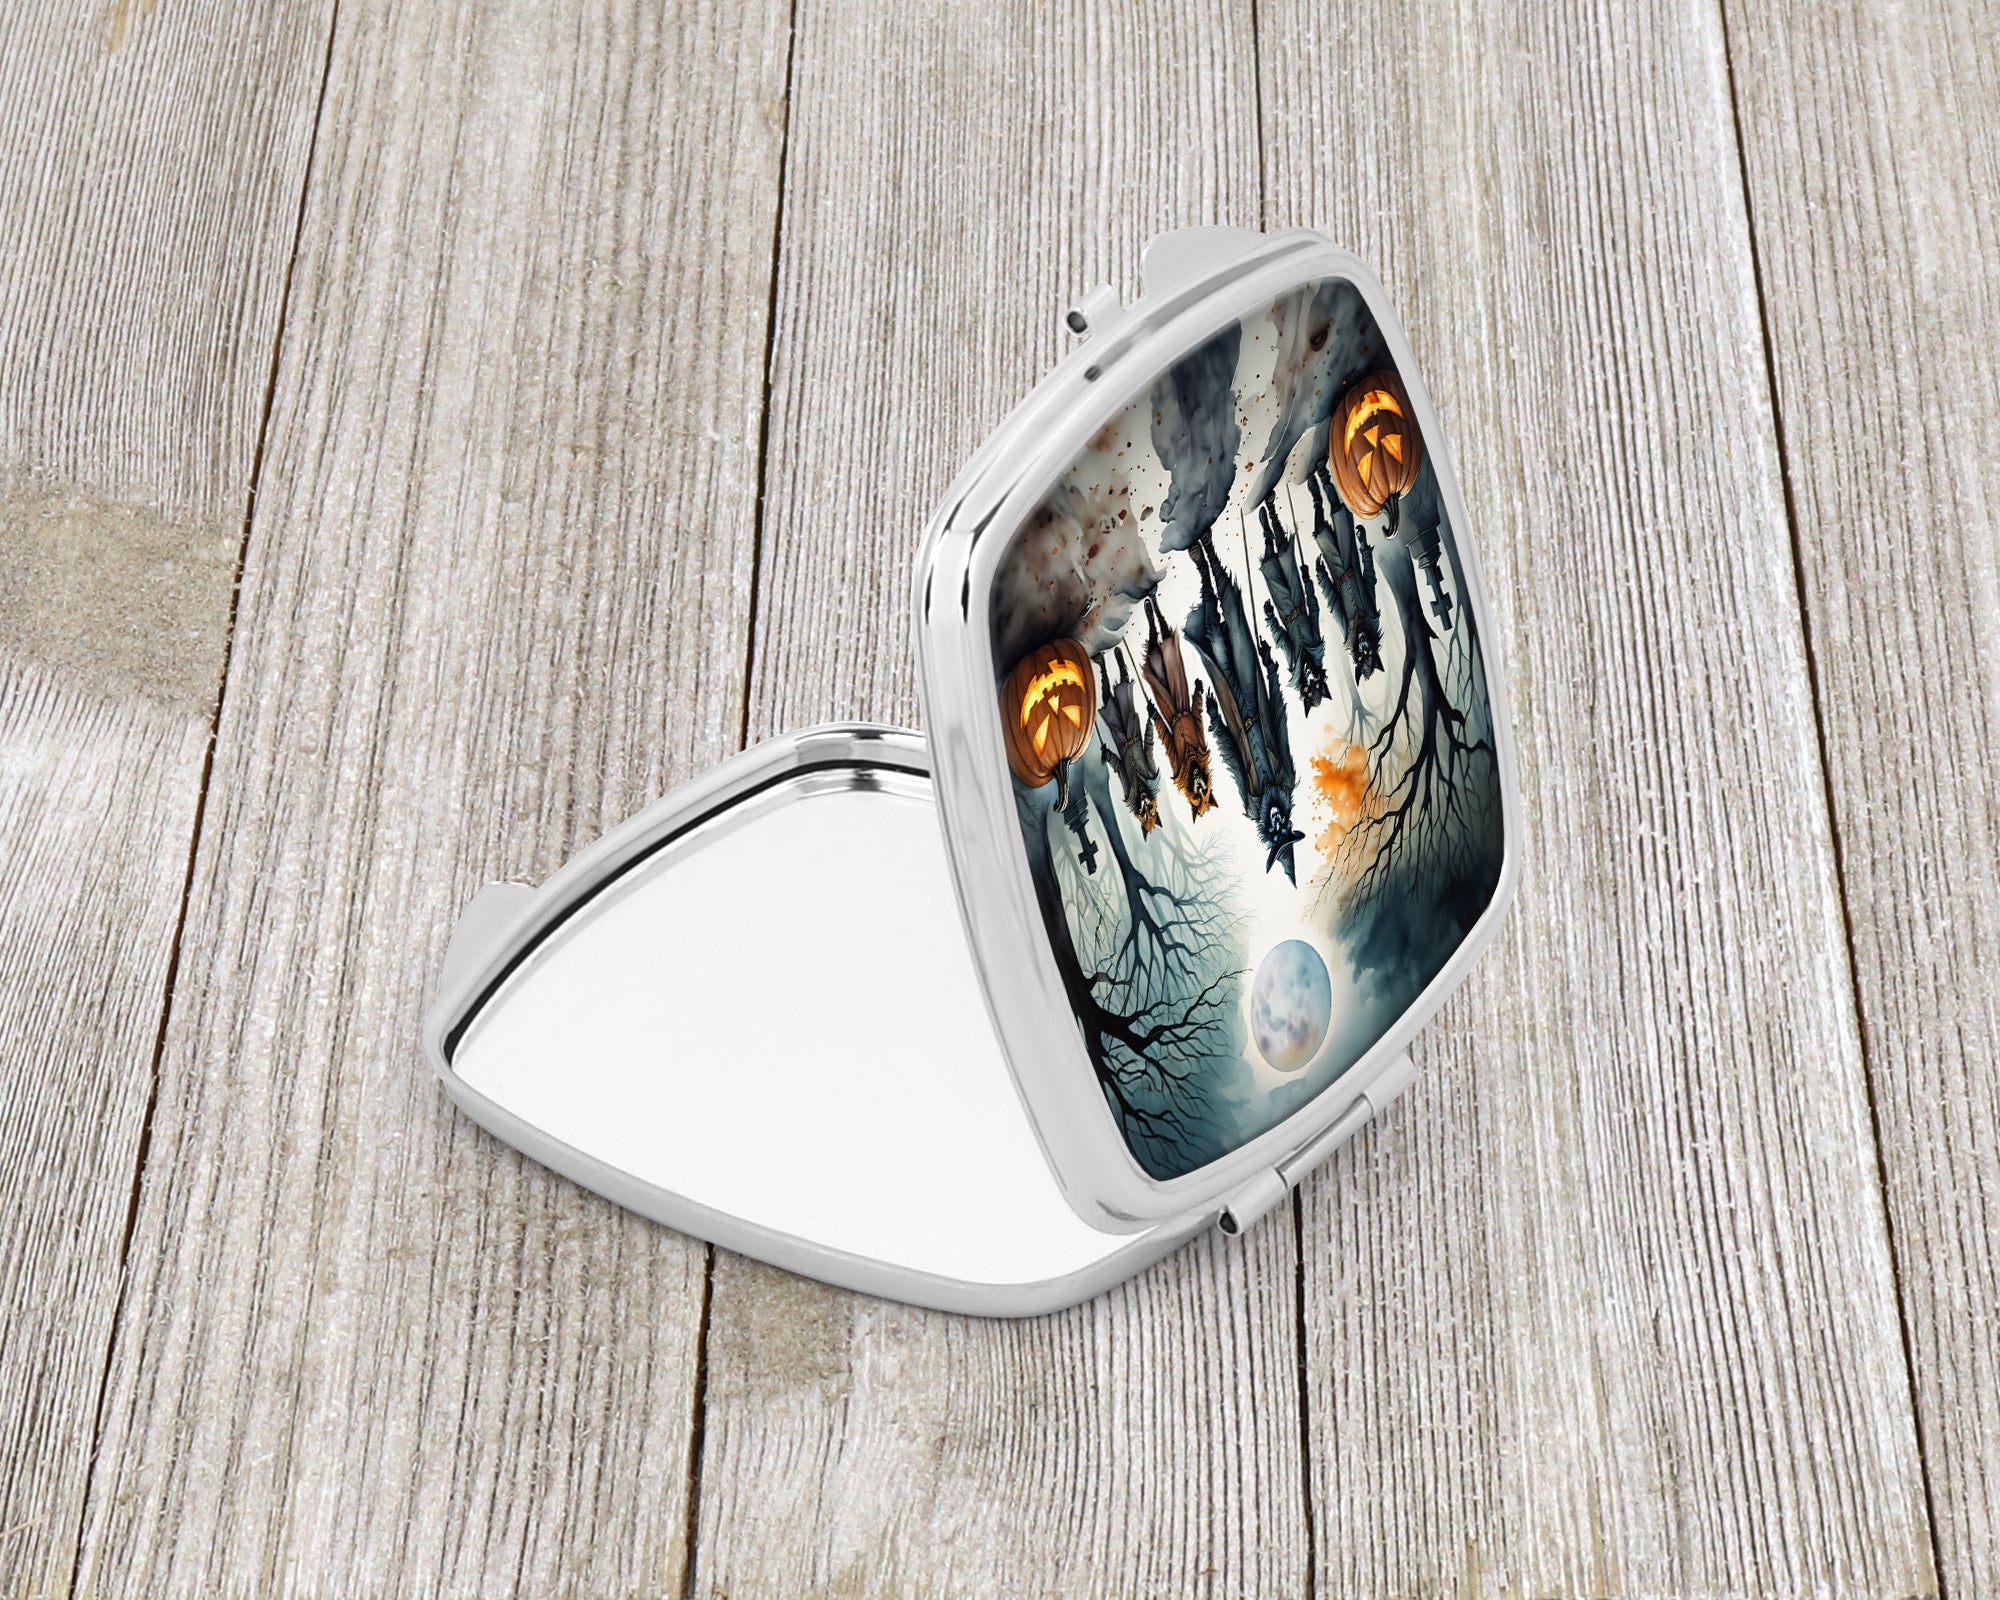 Buy this Werewolves Spooky Halloween Compact Mirror